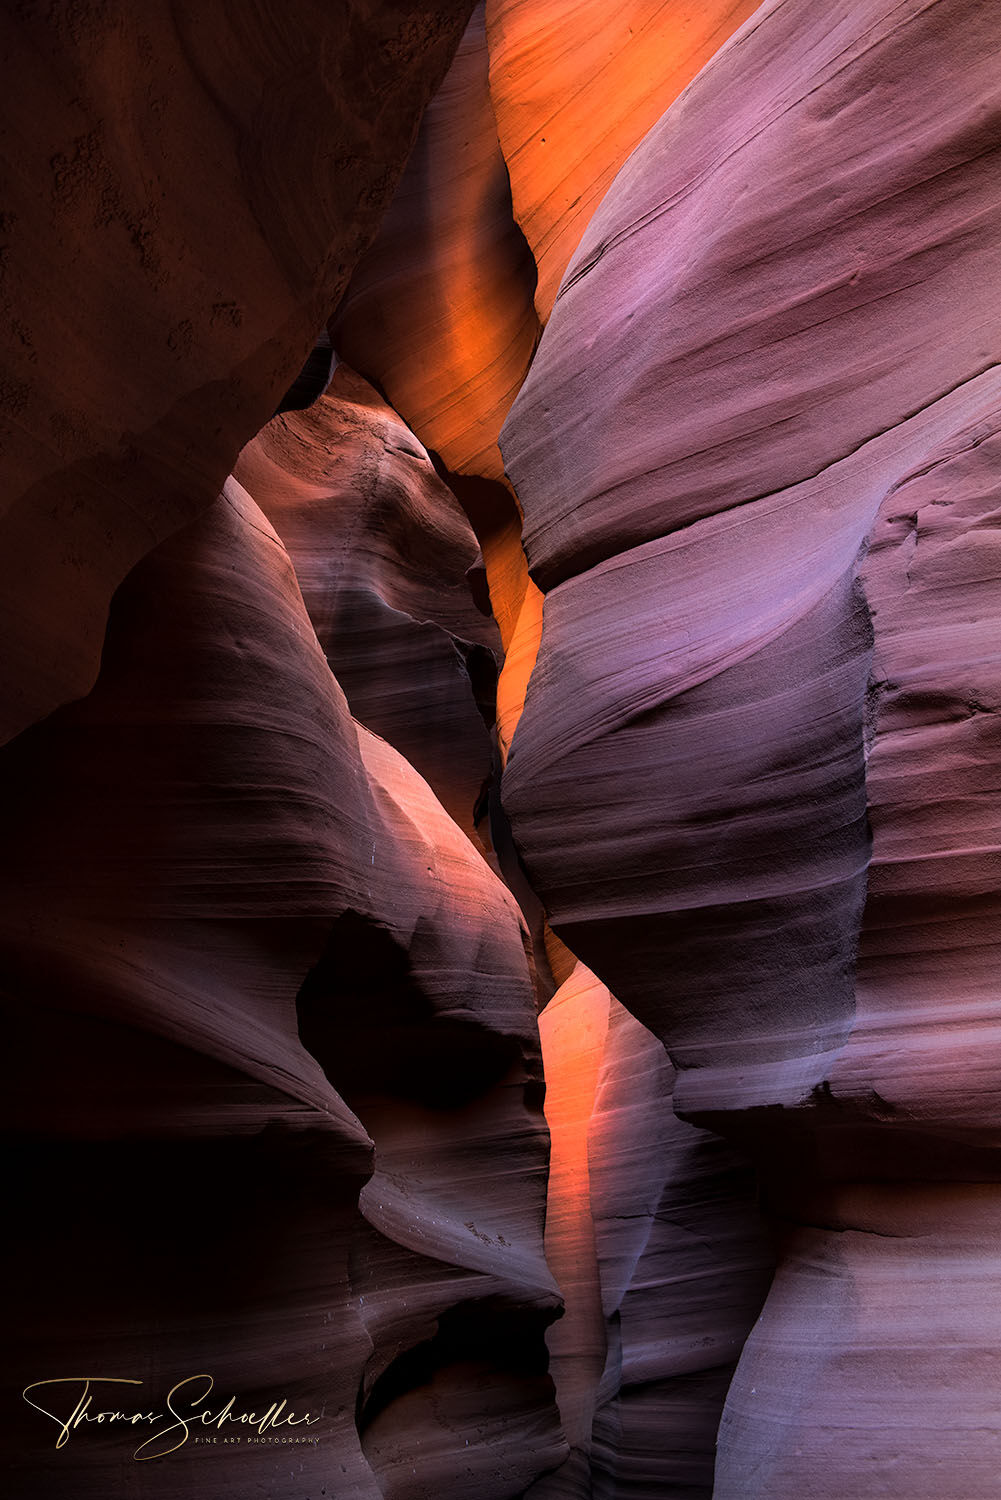 The mesmerizing sculpted sandstone textures come to life in Upper Antelope Canyon illuminated by bounce light | Limited Edition Fine Art Abstract Nature prints 